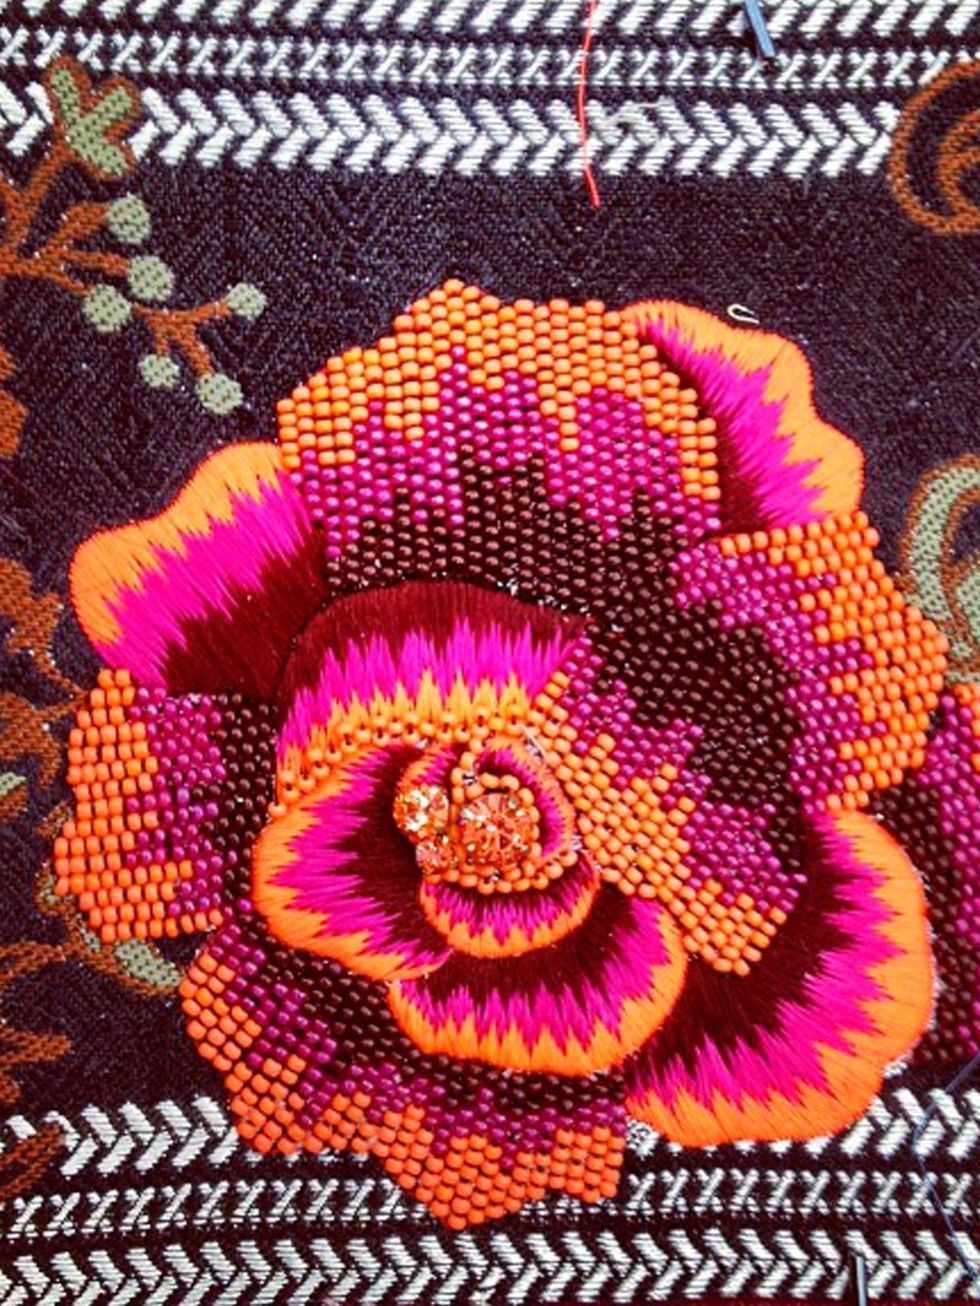 <p>'The hand-embroidered rose of the Floral Folk weave in my autumn/winter 2013 collection'</p>